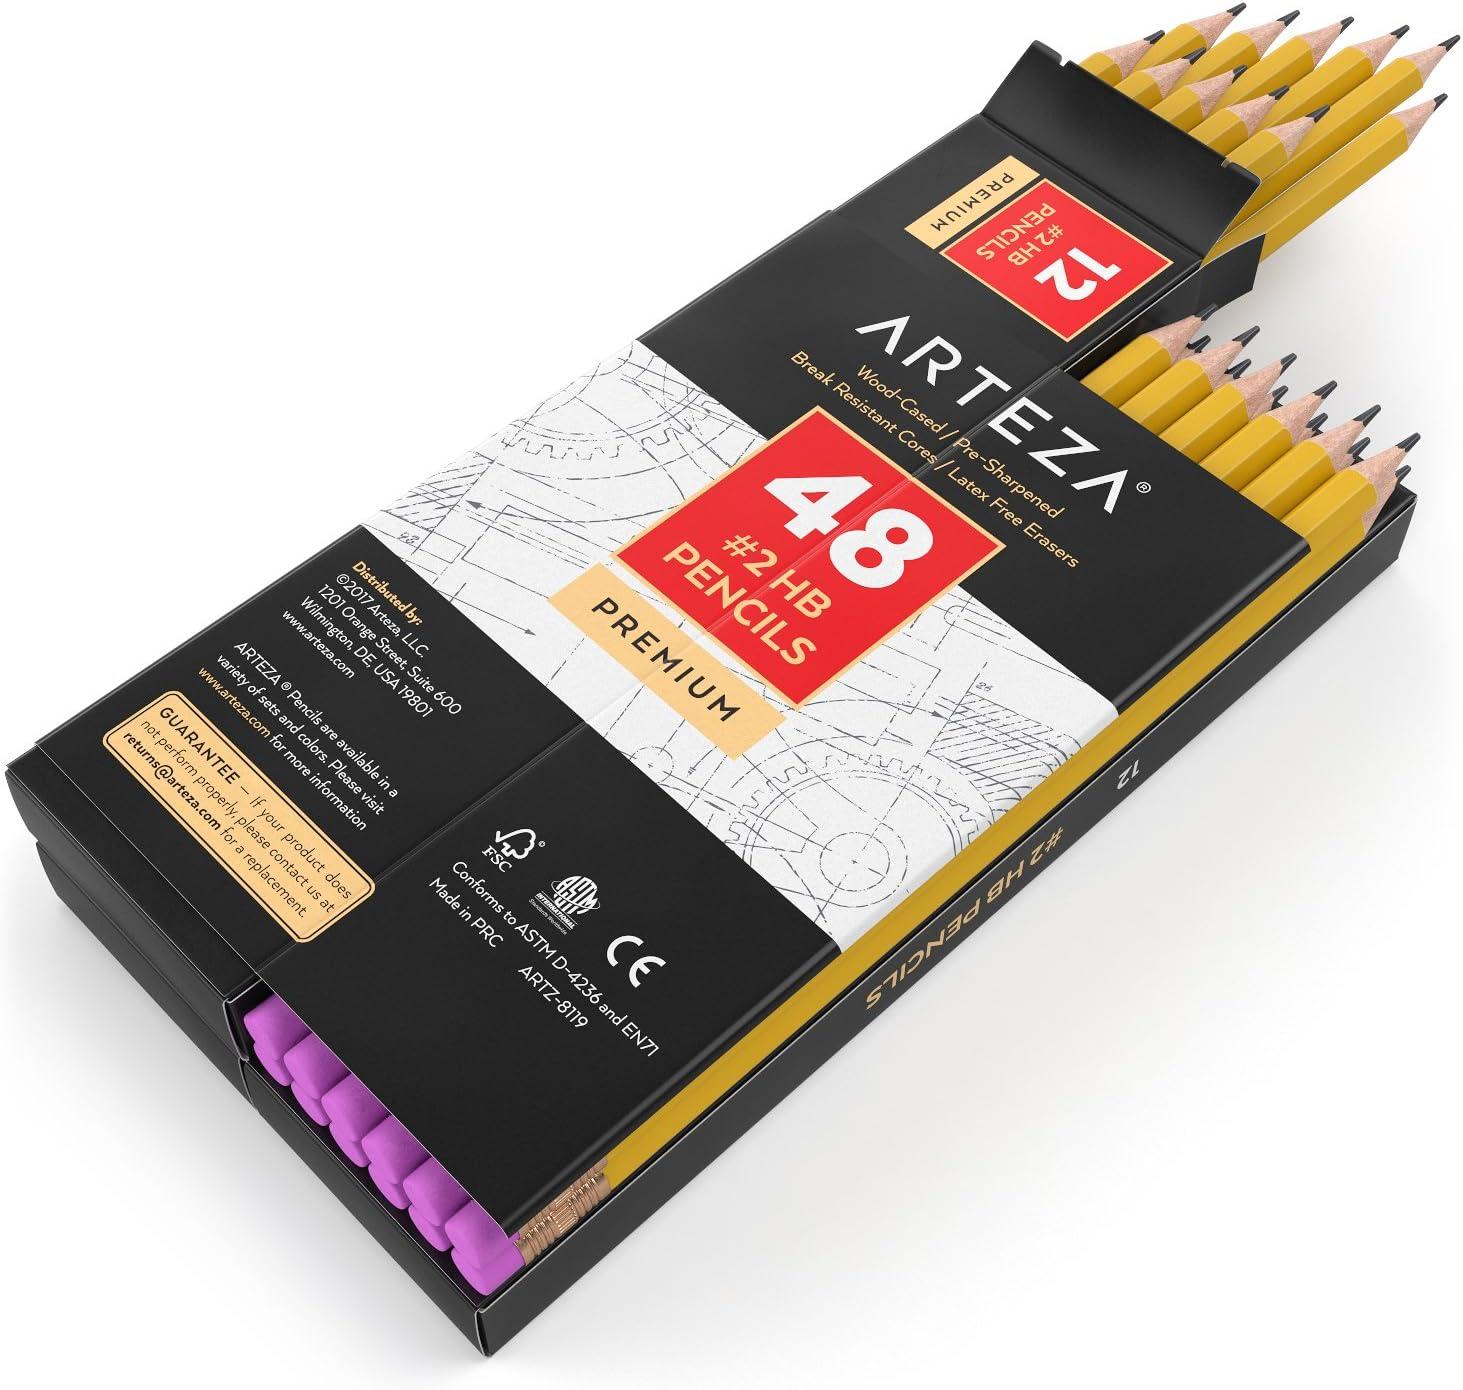 arteza hb pencils #2 pack of 48 wood-cased graphite pencils in bulk pre-sharpened with latex-free erasers